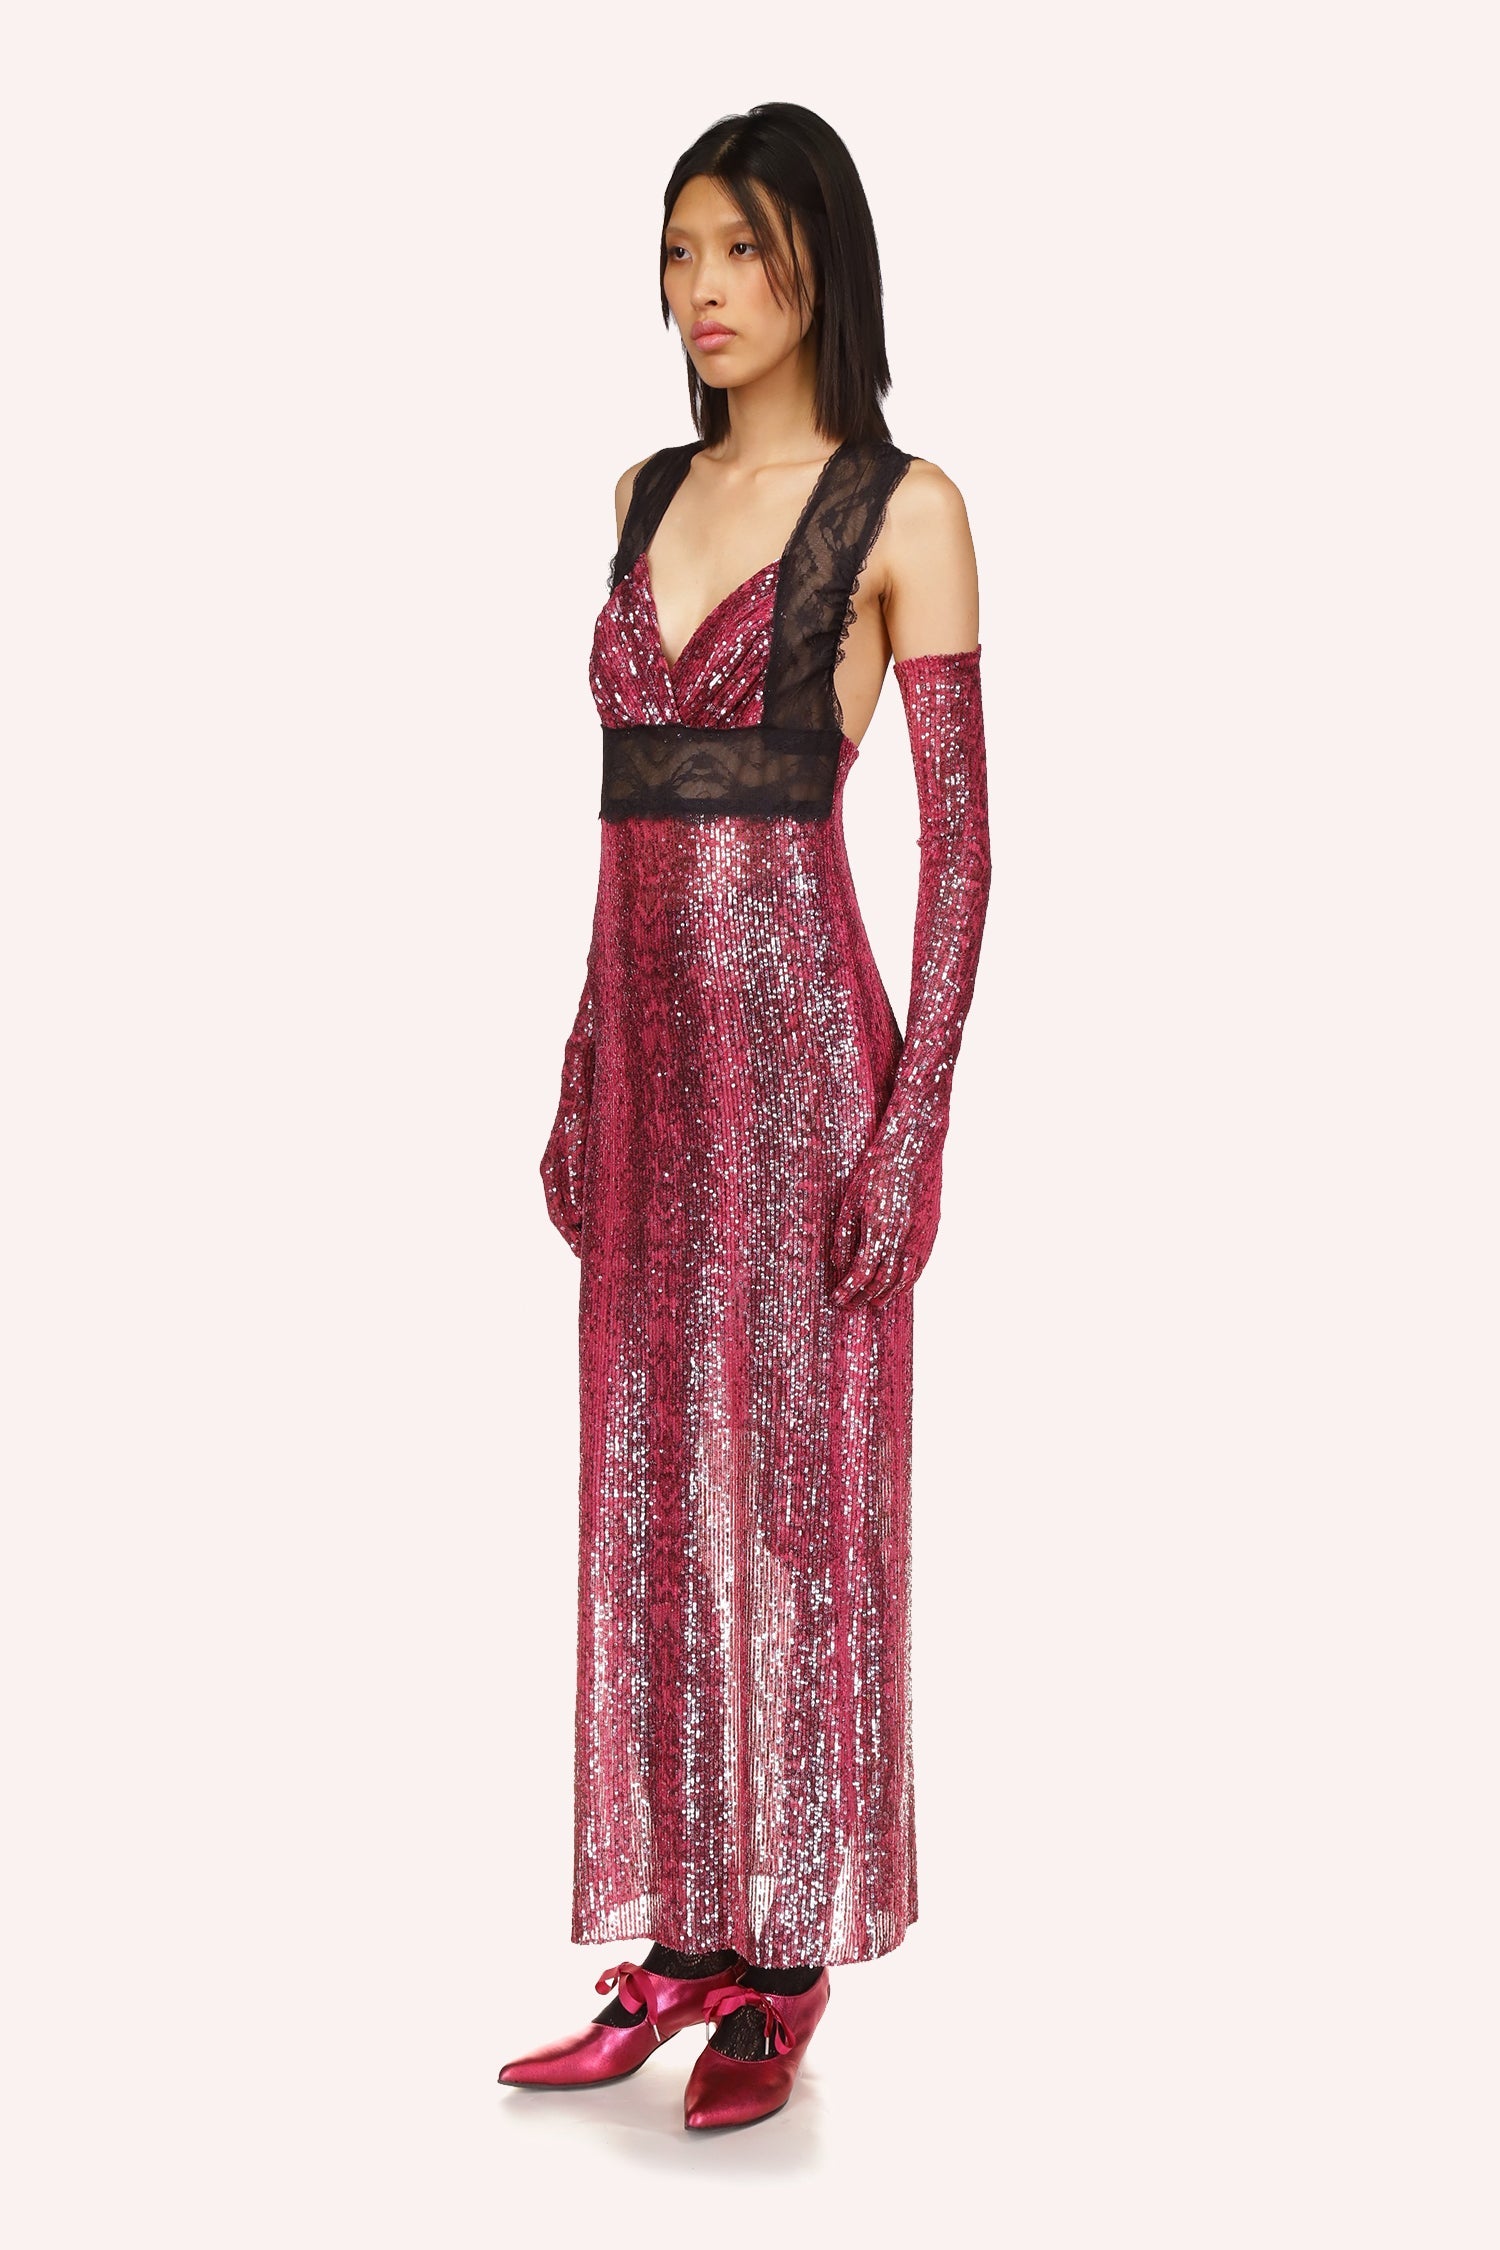 Long V-neck cut, shiny red, large see-through black lace under the bust pass over the shoulder, ankles-long